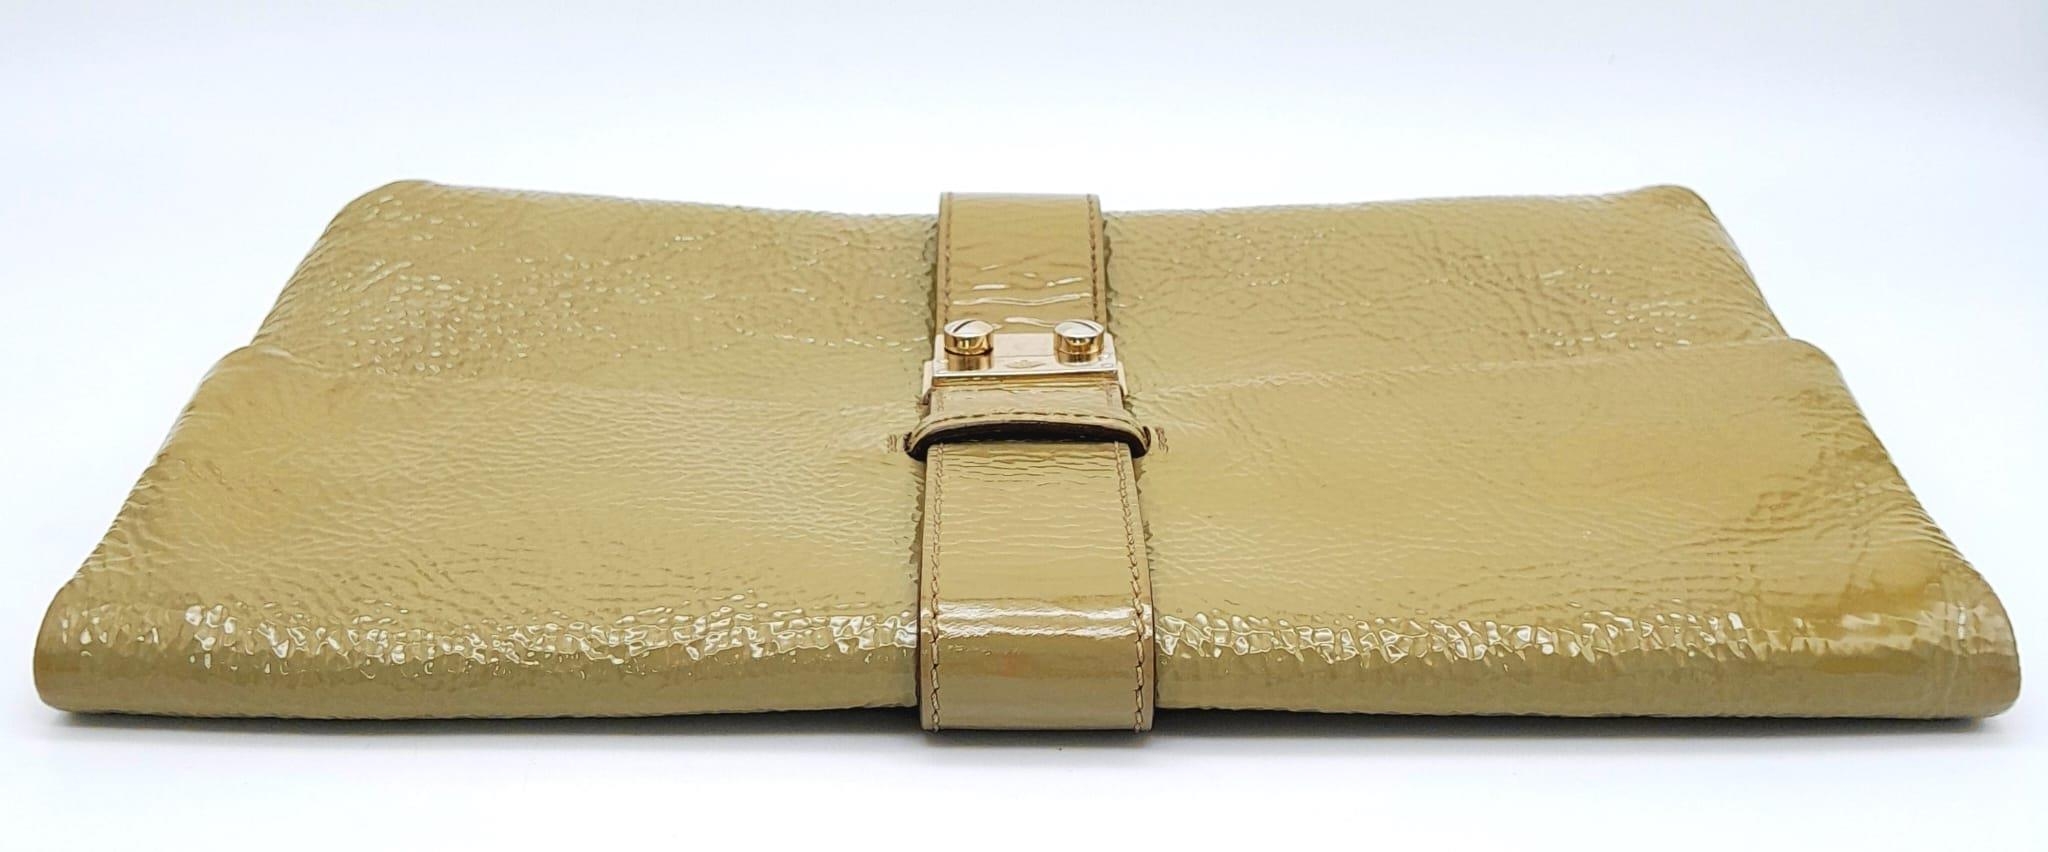 A Mulberry Harriet Khaki Leather Clutch Bag. Spongy patent leather exterior with gold-tone hardware, - Image 5 of 10